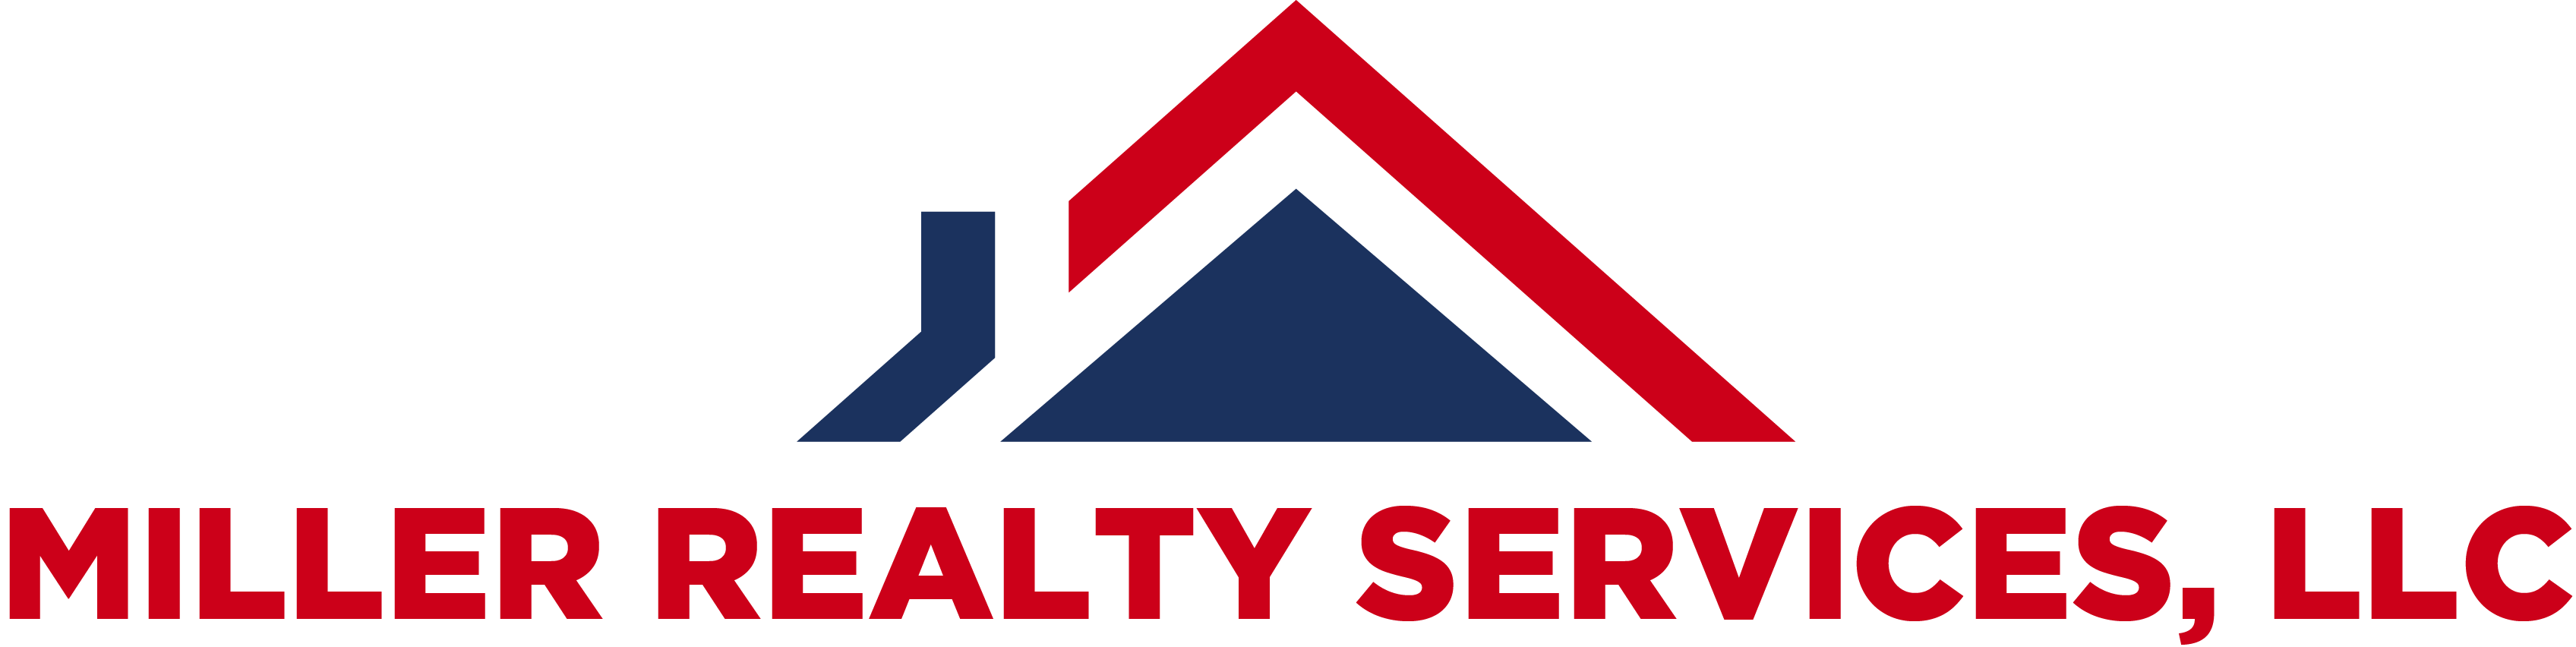 Miller Realty Services